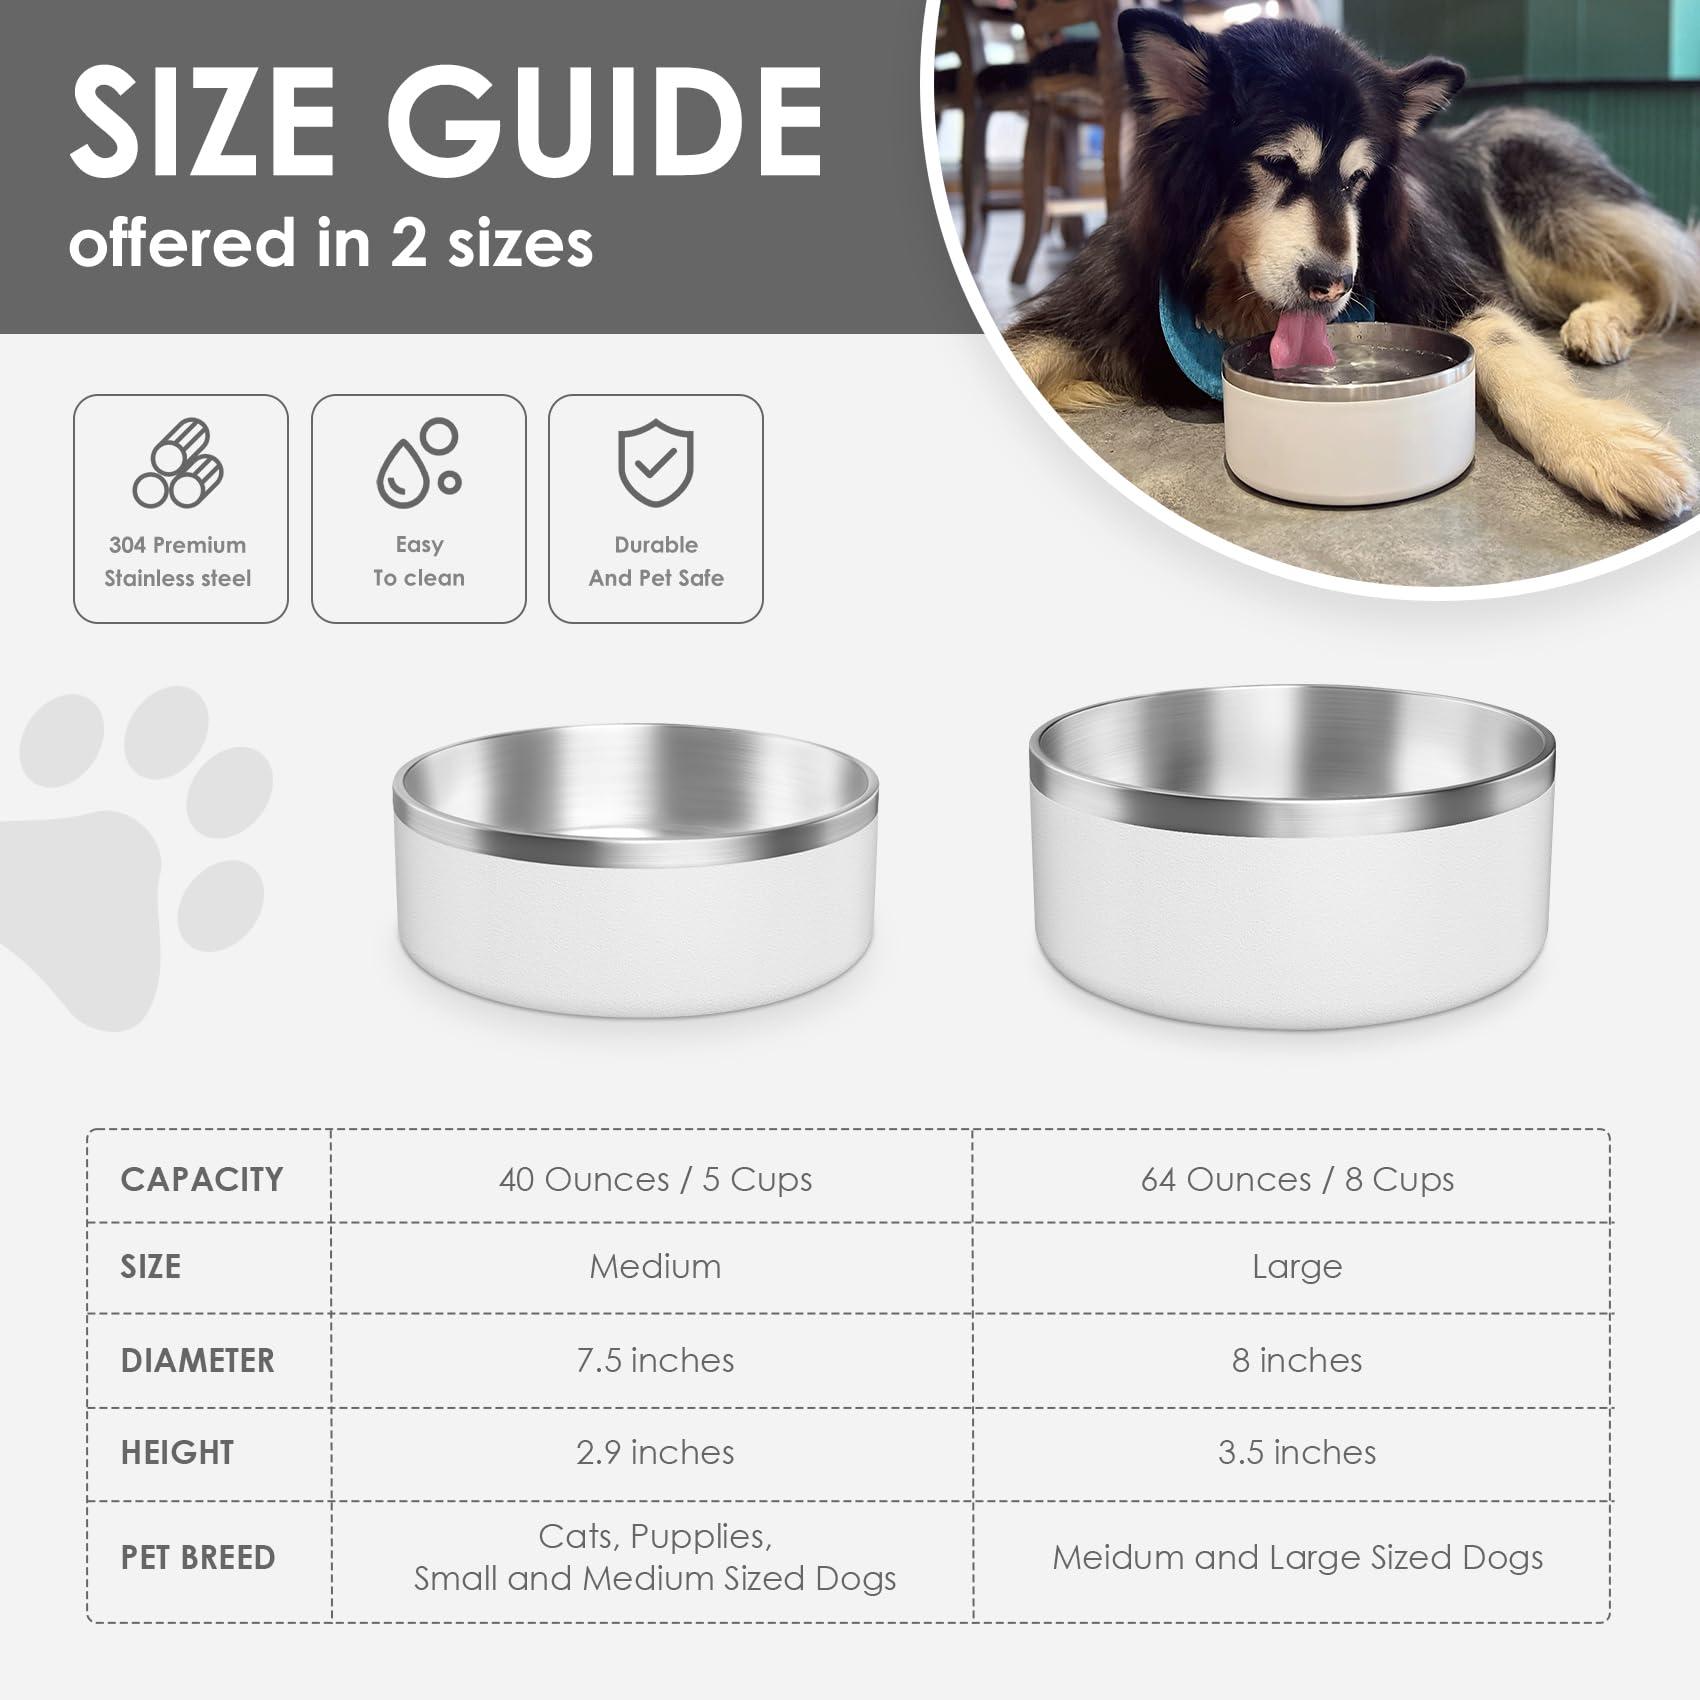 IKITCHEN Dog Bowl for Food and Water, 40 Oz Stainless Steel Pet Feeding Bowl, Durable Non-Skid Double Wall Insulated Heavy Duty with Rubber Bottom for Medium Large Sized Dogs (40 Ounces/5 Cup, White) 3